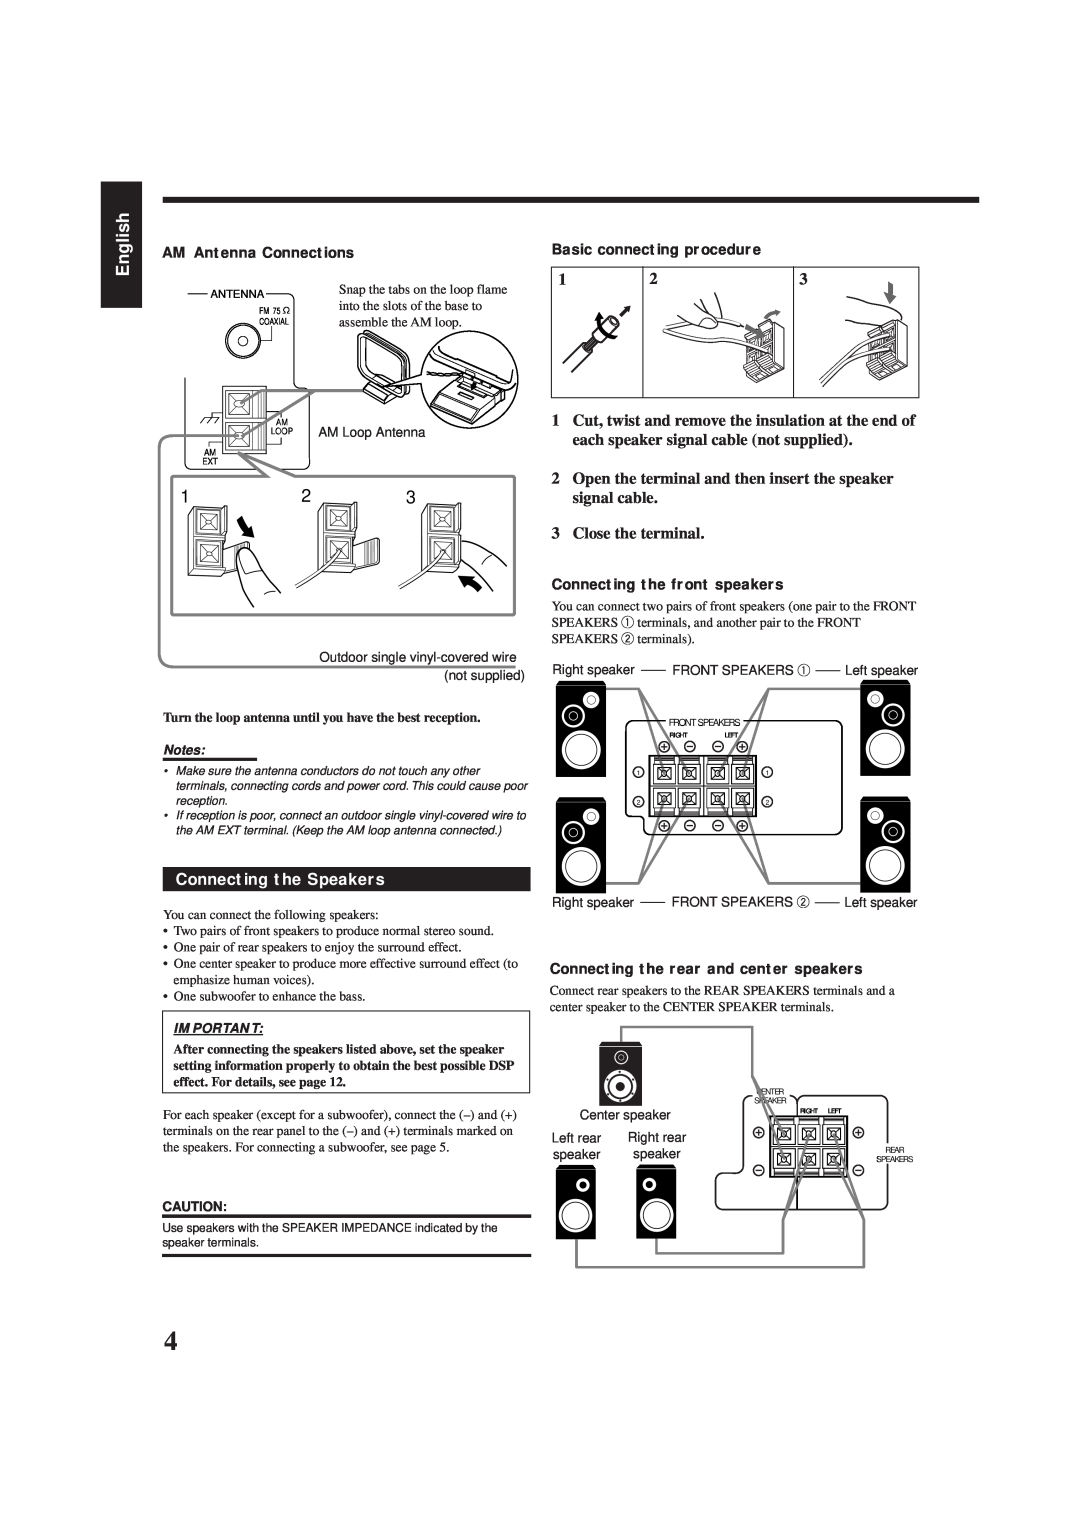 JVC RX-6100VBK manual Connecting the Speakers, English, AM Antenna Connections, Basic connecting procedure 